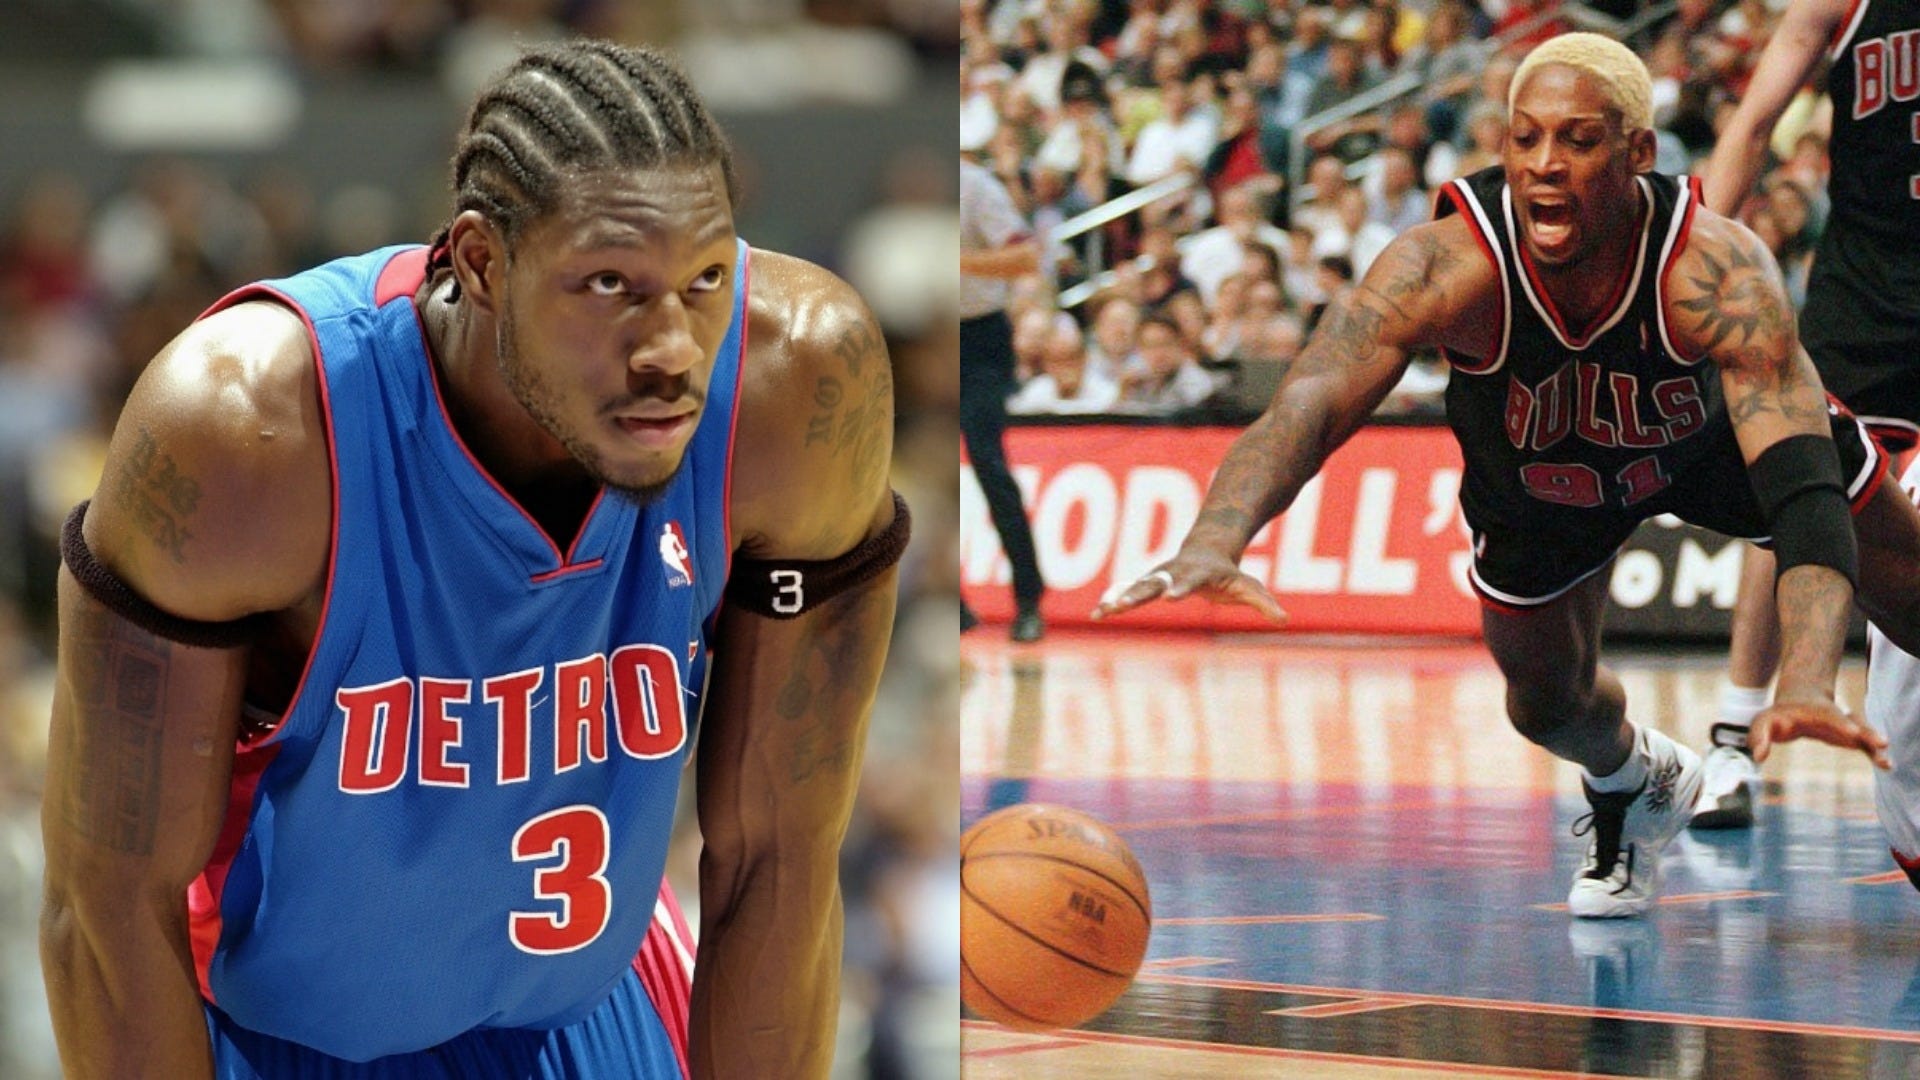 Dennis Rodman's championships with the Detroit Pistons matter the most